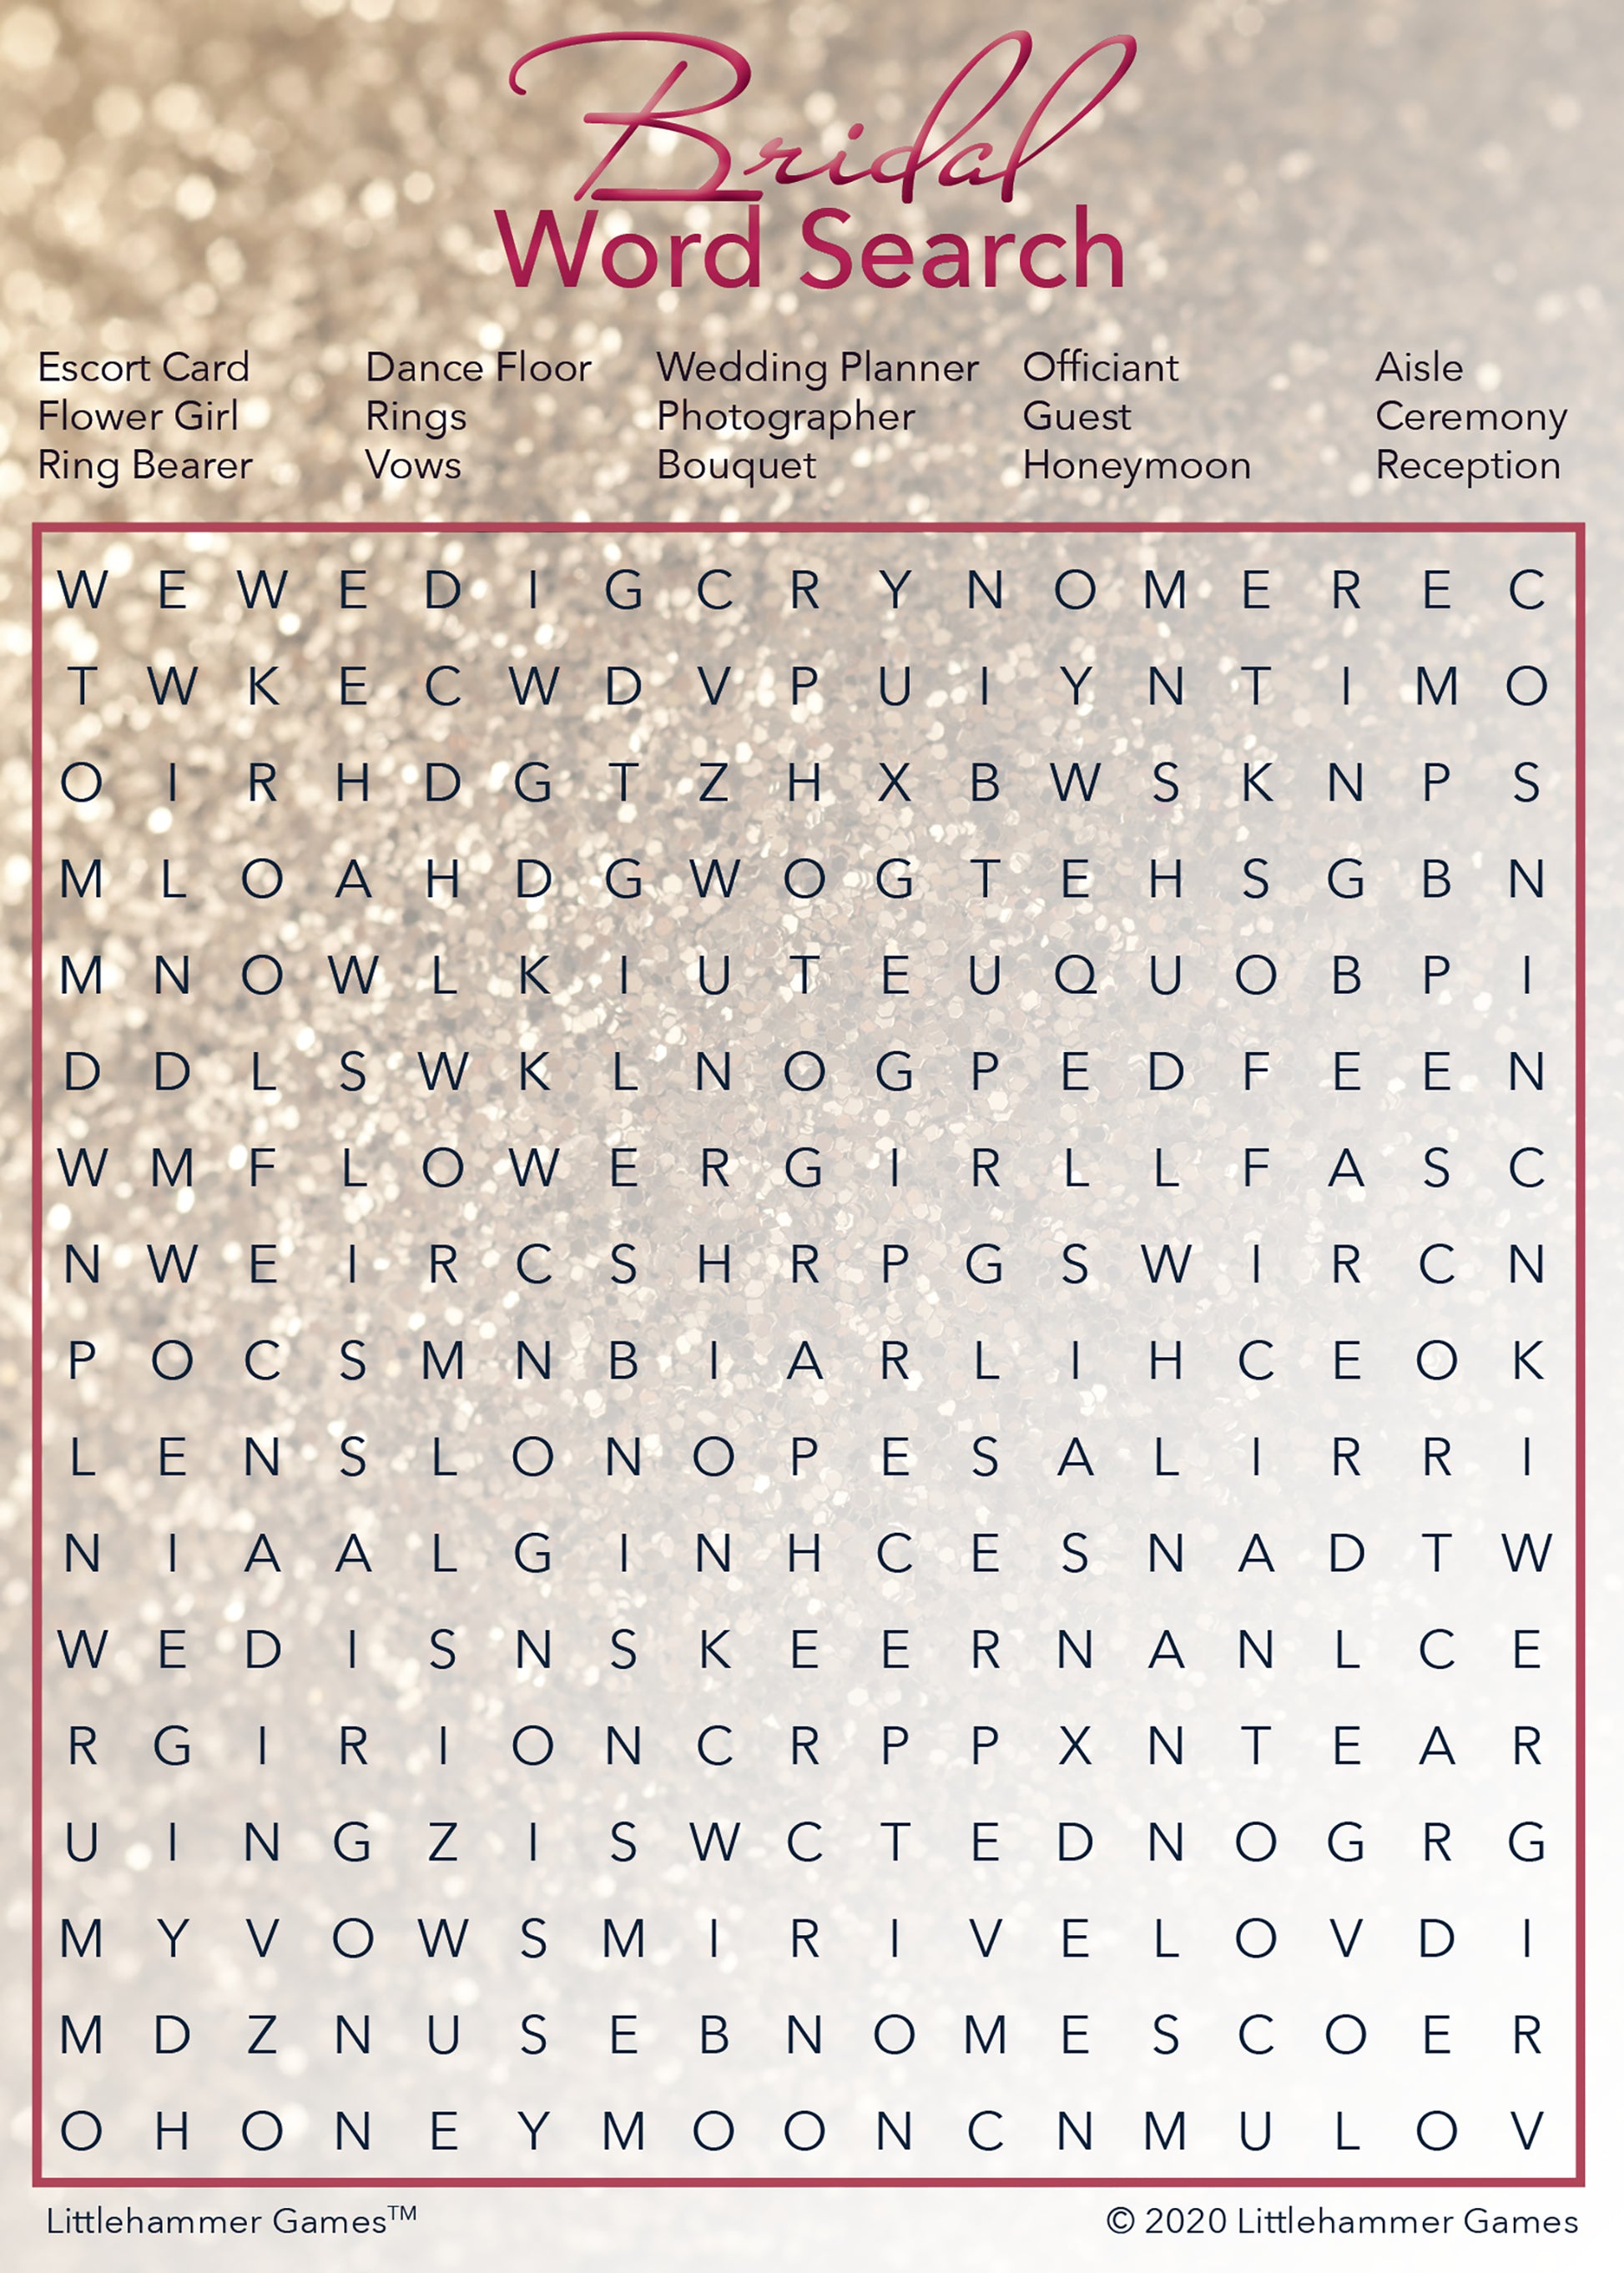 Bridal Word Search game card with a glittery rose gold background